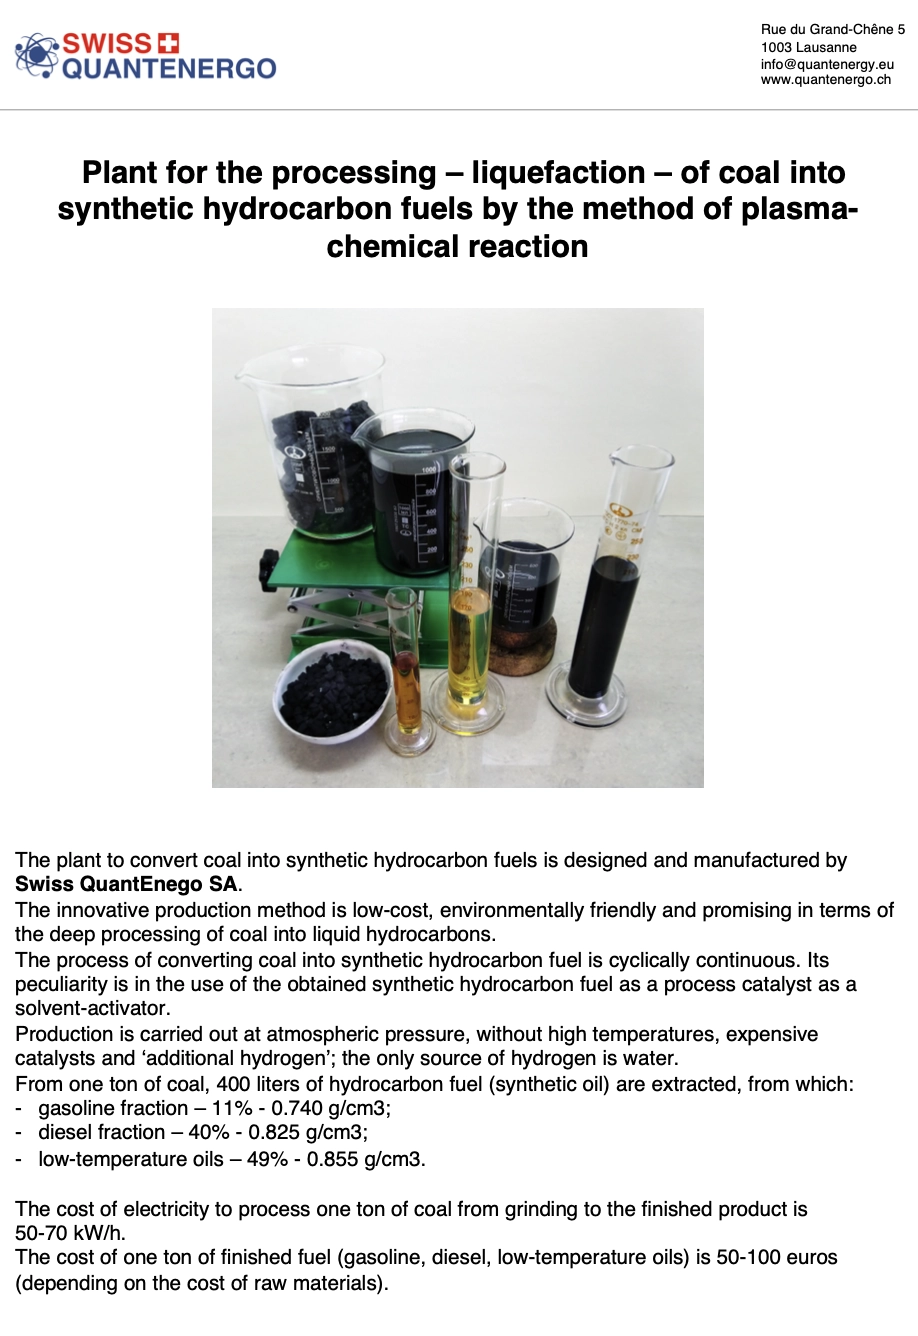 1603-encoal-into-synthetic-hydrocarbon-fuels-16571884206312.png